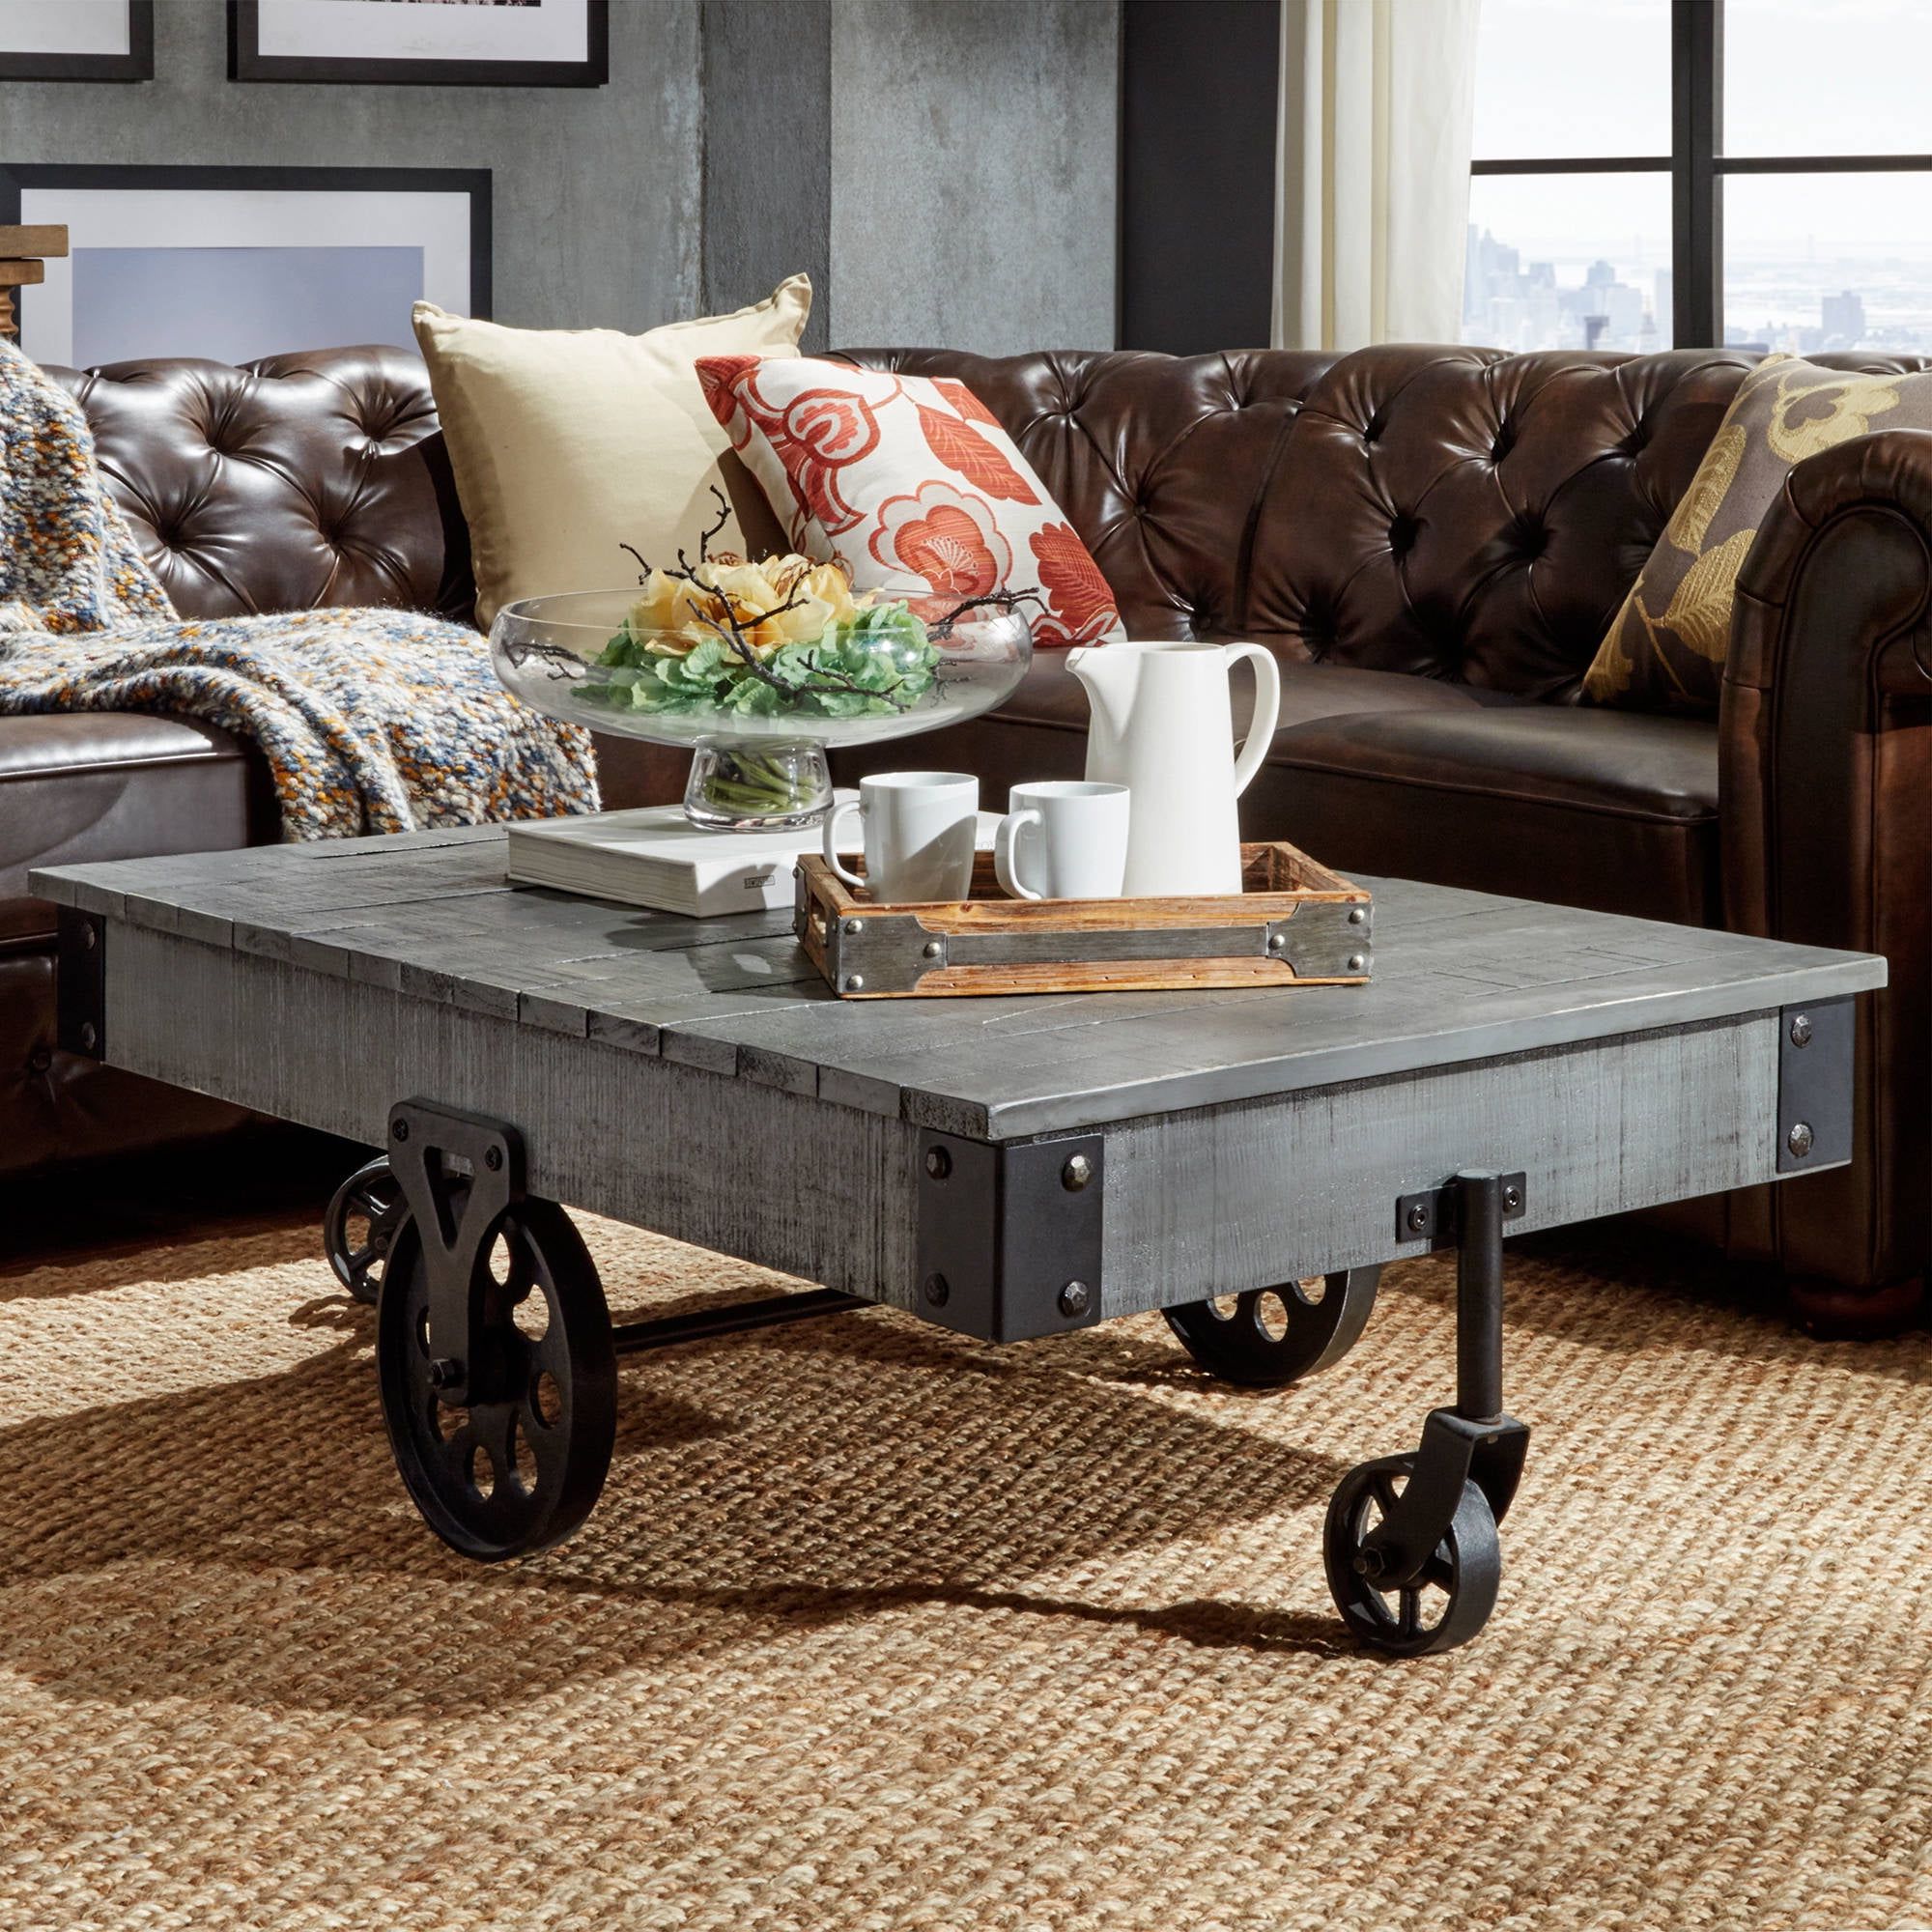 Weston Home Metal Supports Cocktail Table With Functional Wheels, Grey Regarding Current Gray Coastal Cocktail Tables (View 10 of 15)